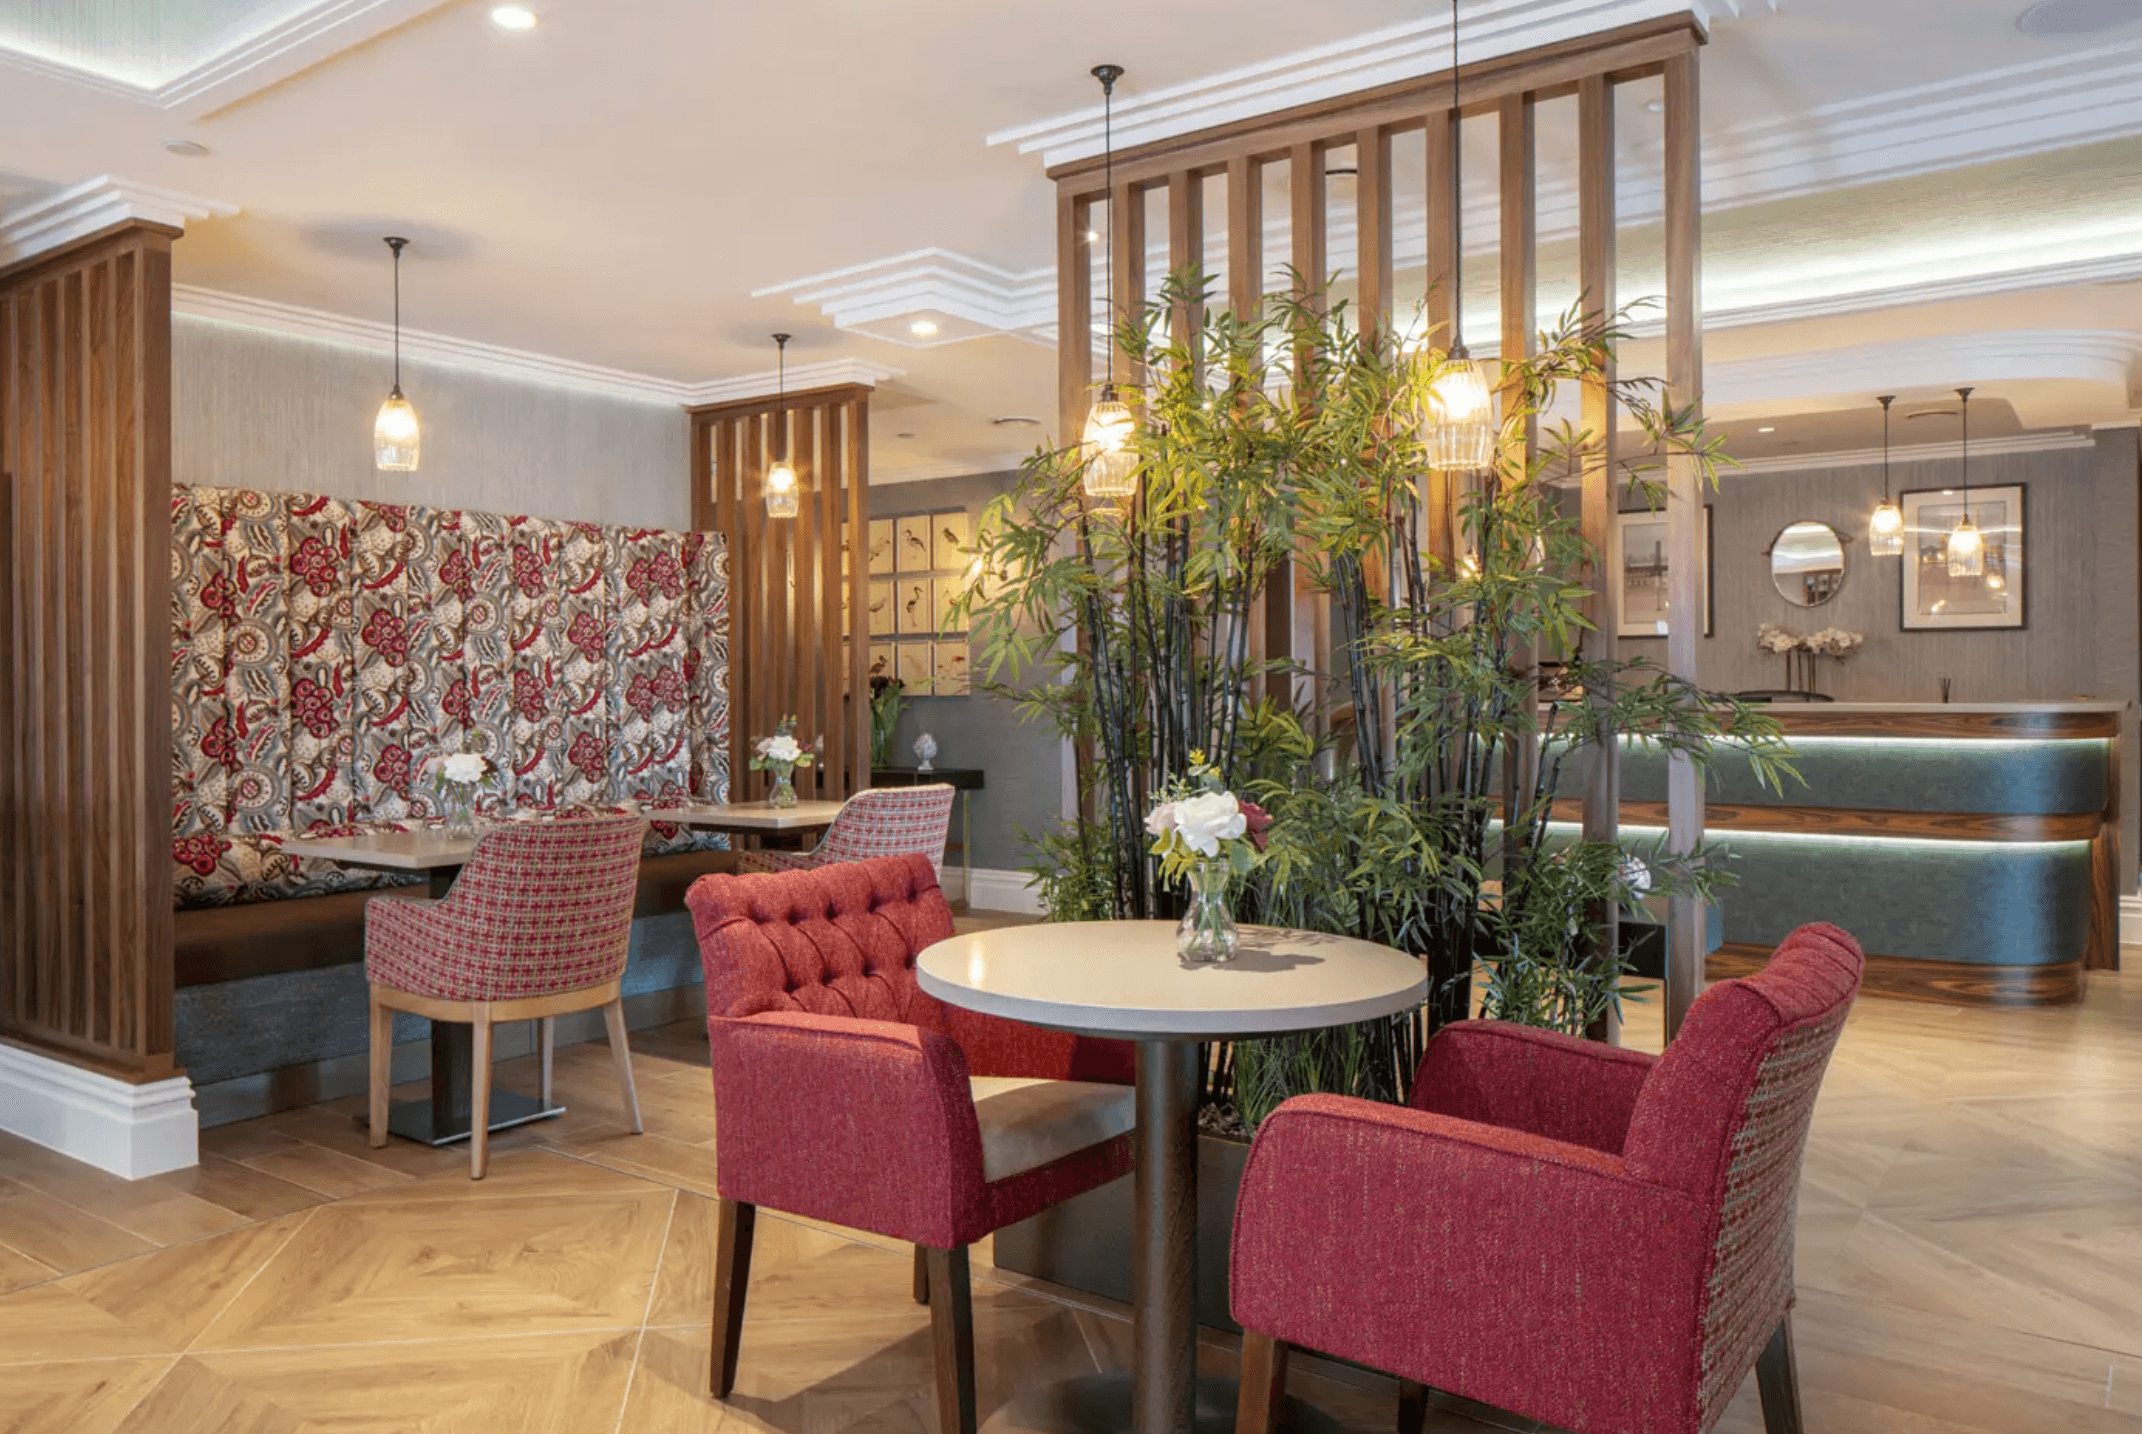 Dining Room at Cavell Park Care Home in Maidstone, Kent